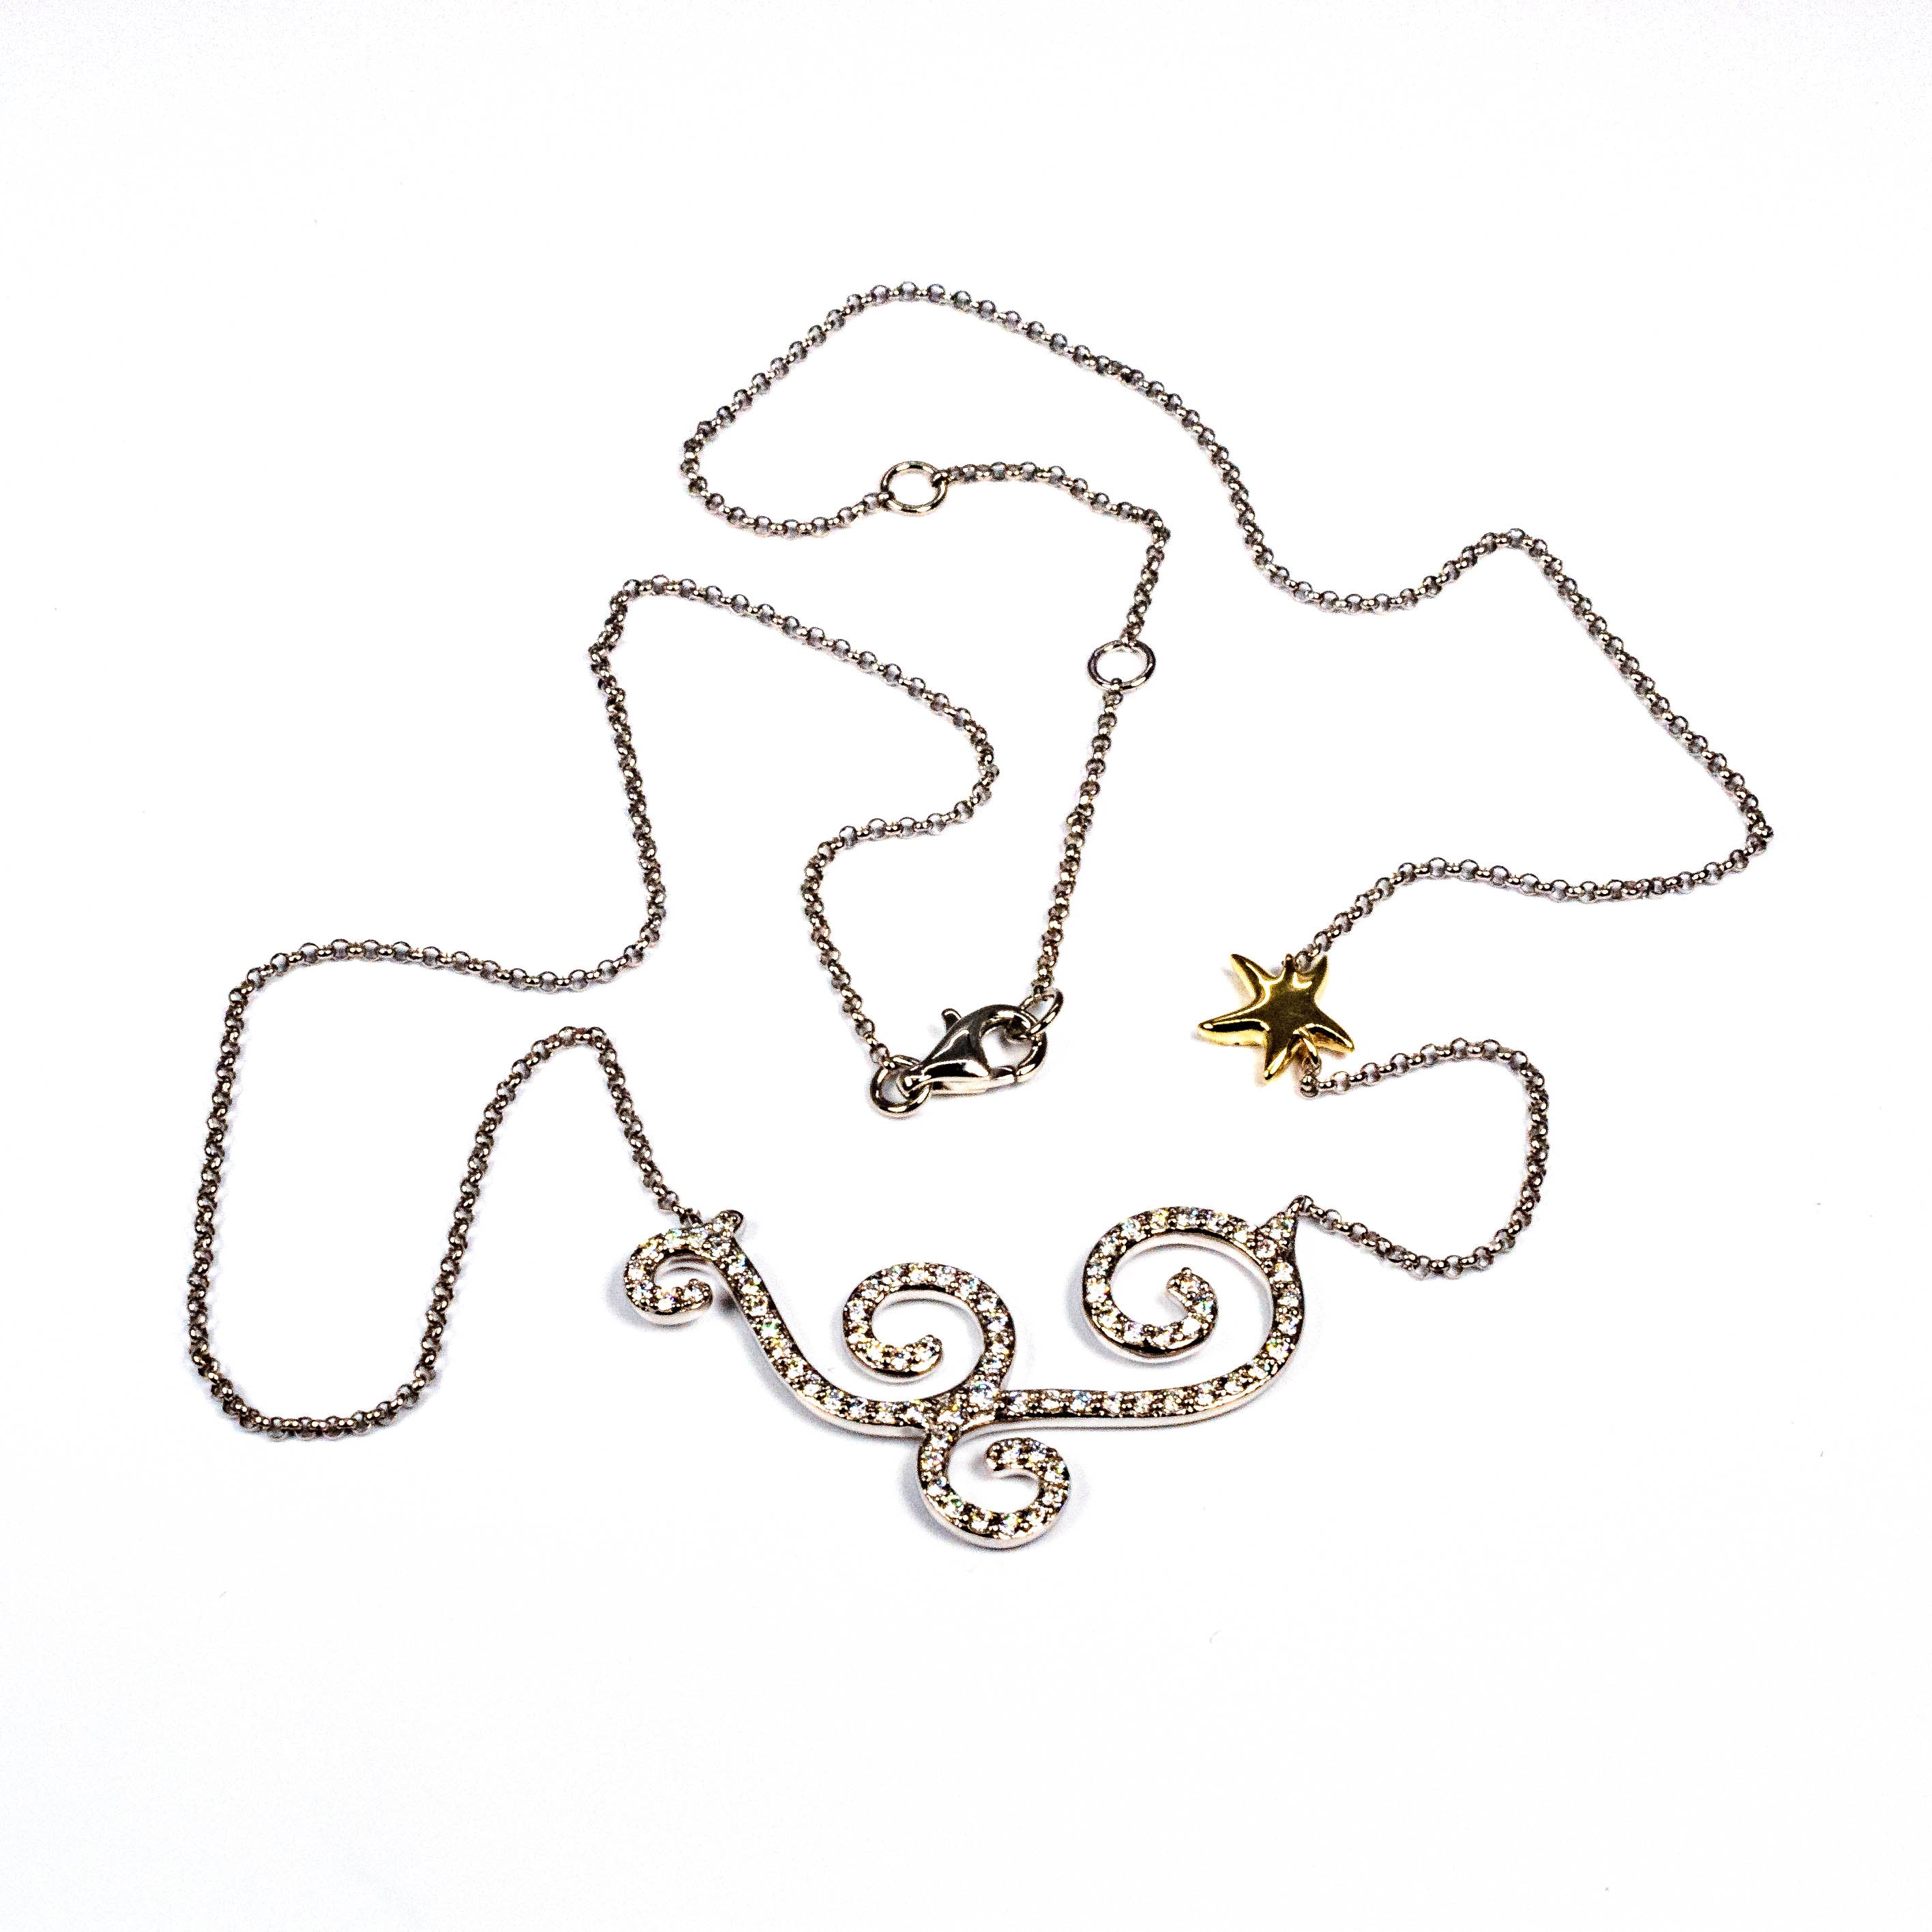 14kt Two Tone Gold Wave and Starfish Diamond Necklace